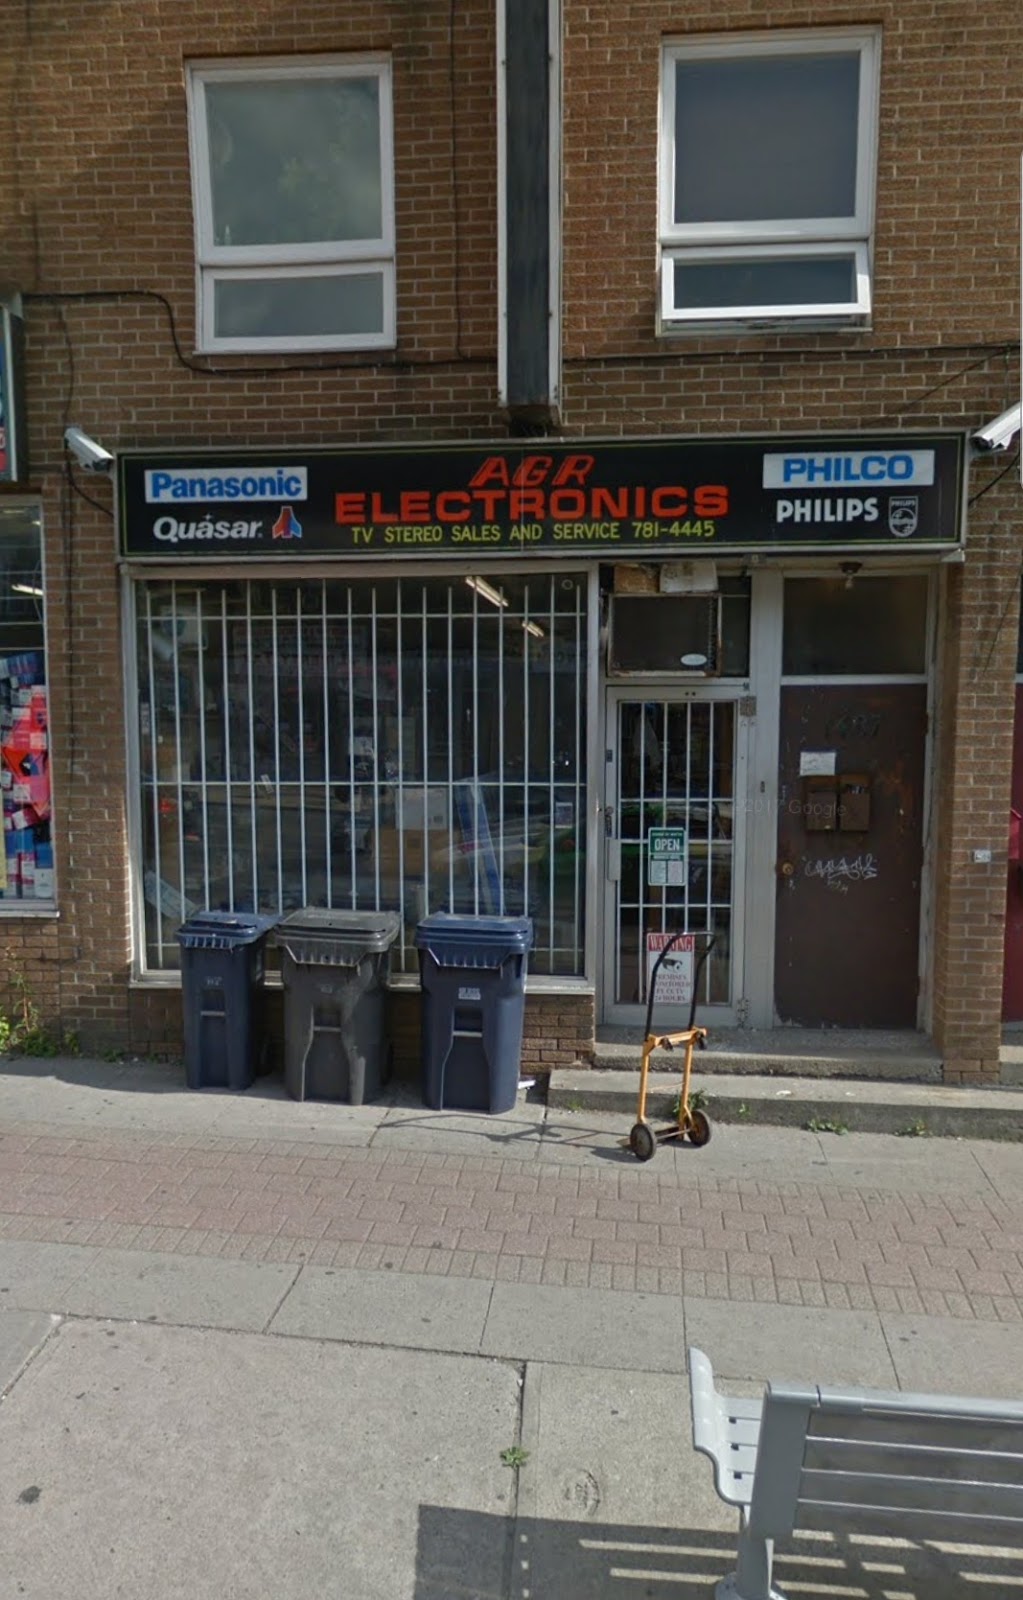 Agr Electronics | home goods store | 1489 Eglinton Ave W, York, ON M6E 2G6, Canada | 4167814445 OR +1 416-781-4445